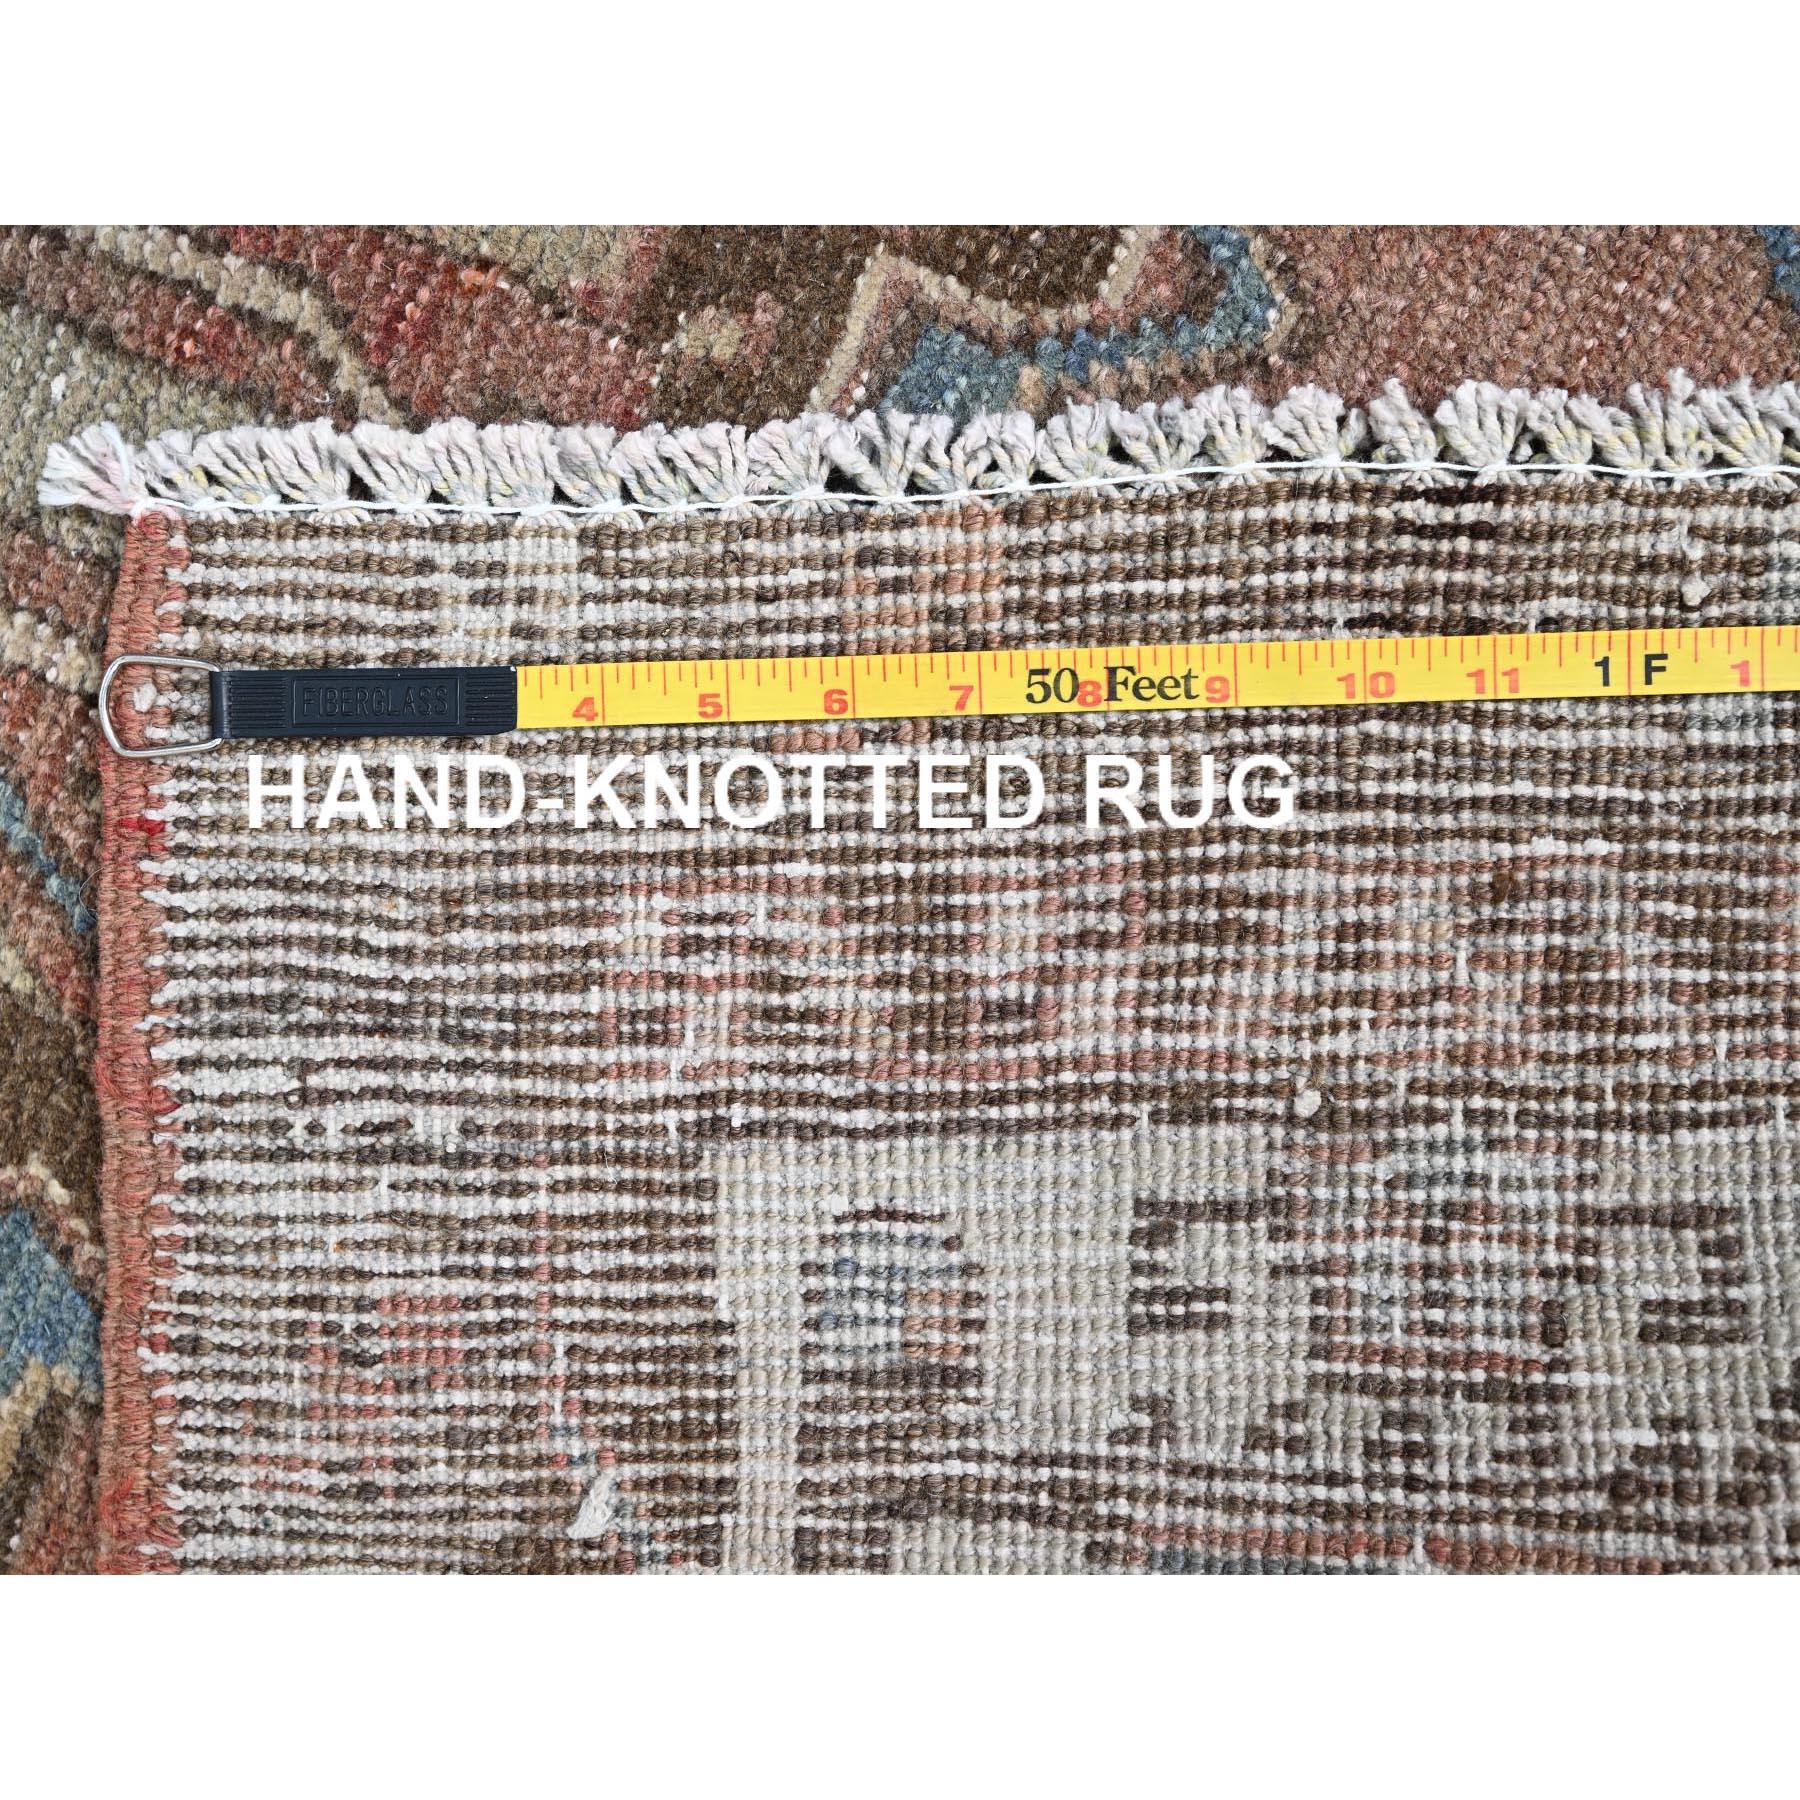 This fabulous Hand-Knotted carpet has been created and designed for extra strength and durability. This rug has been handcrafted for weeks in the traditional method that is used to make
Exact Rug Size in Feet and Inches : 3'2